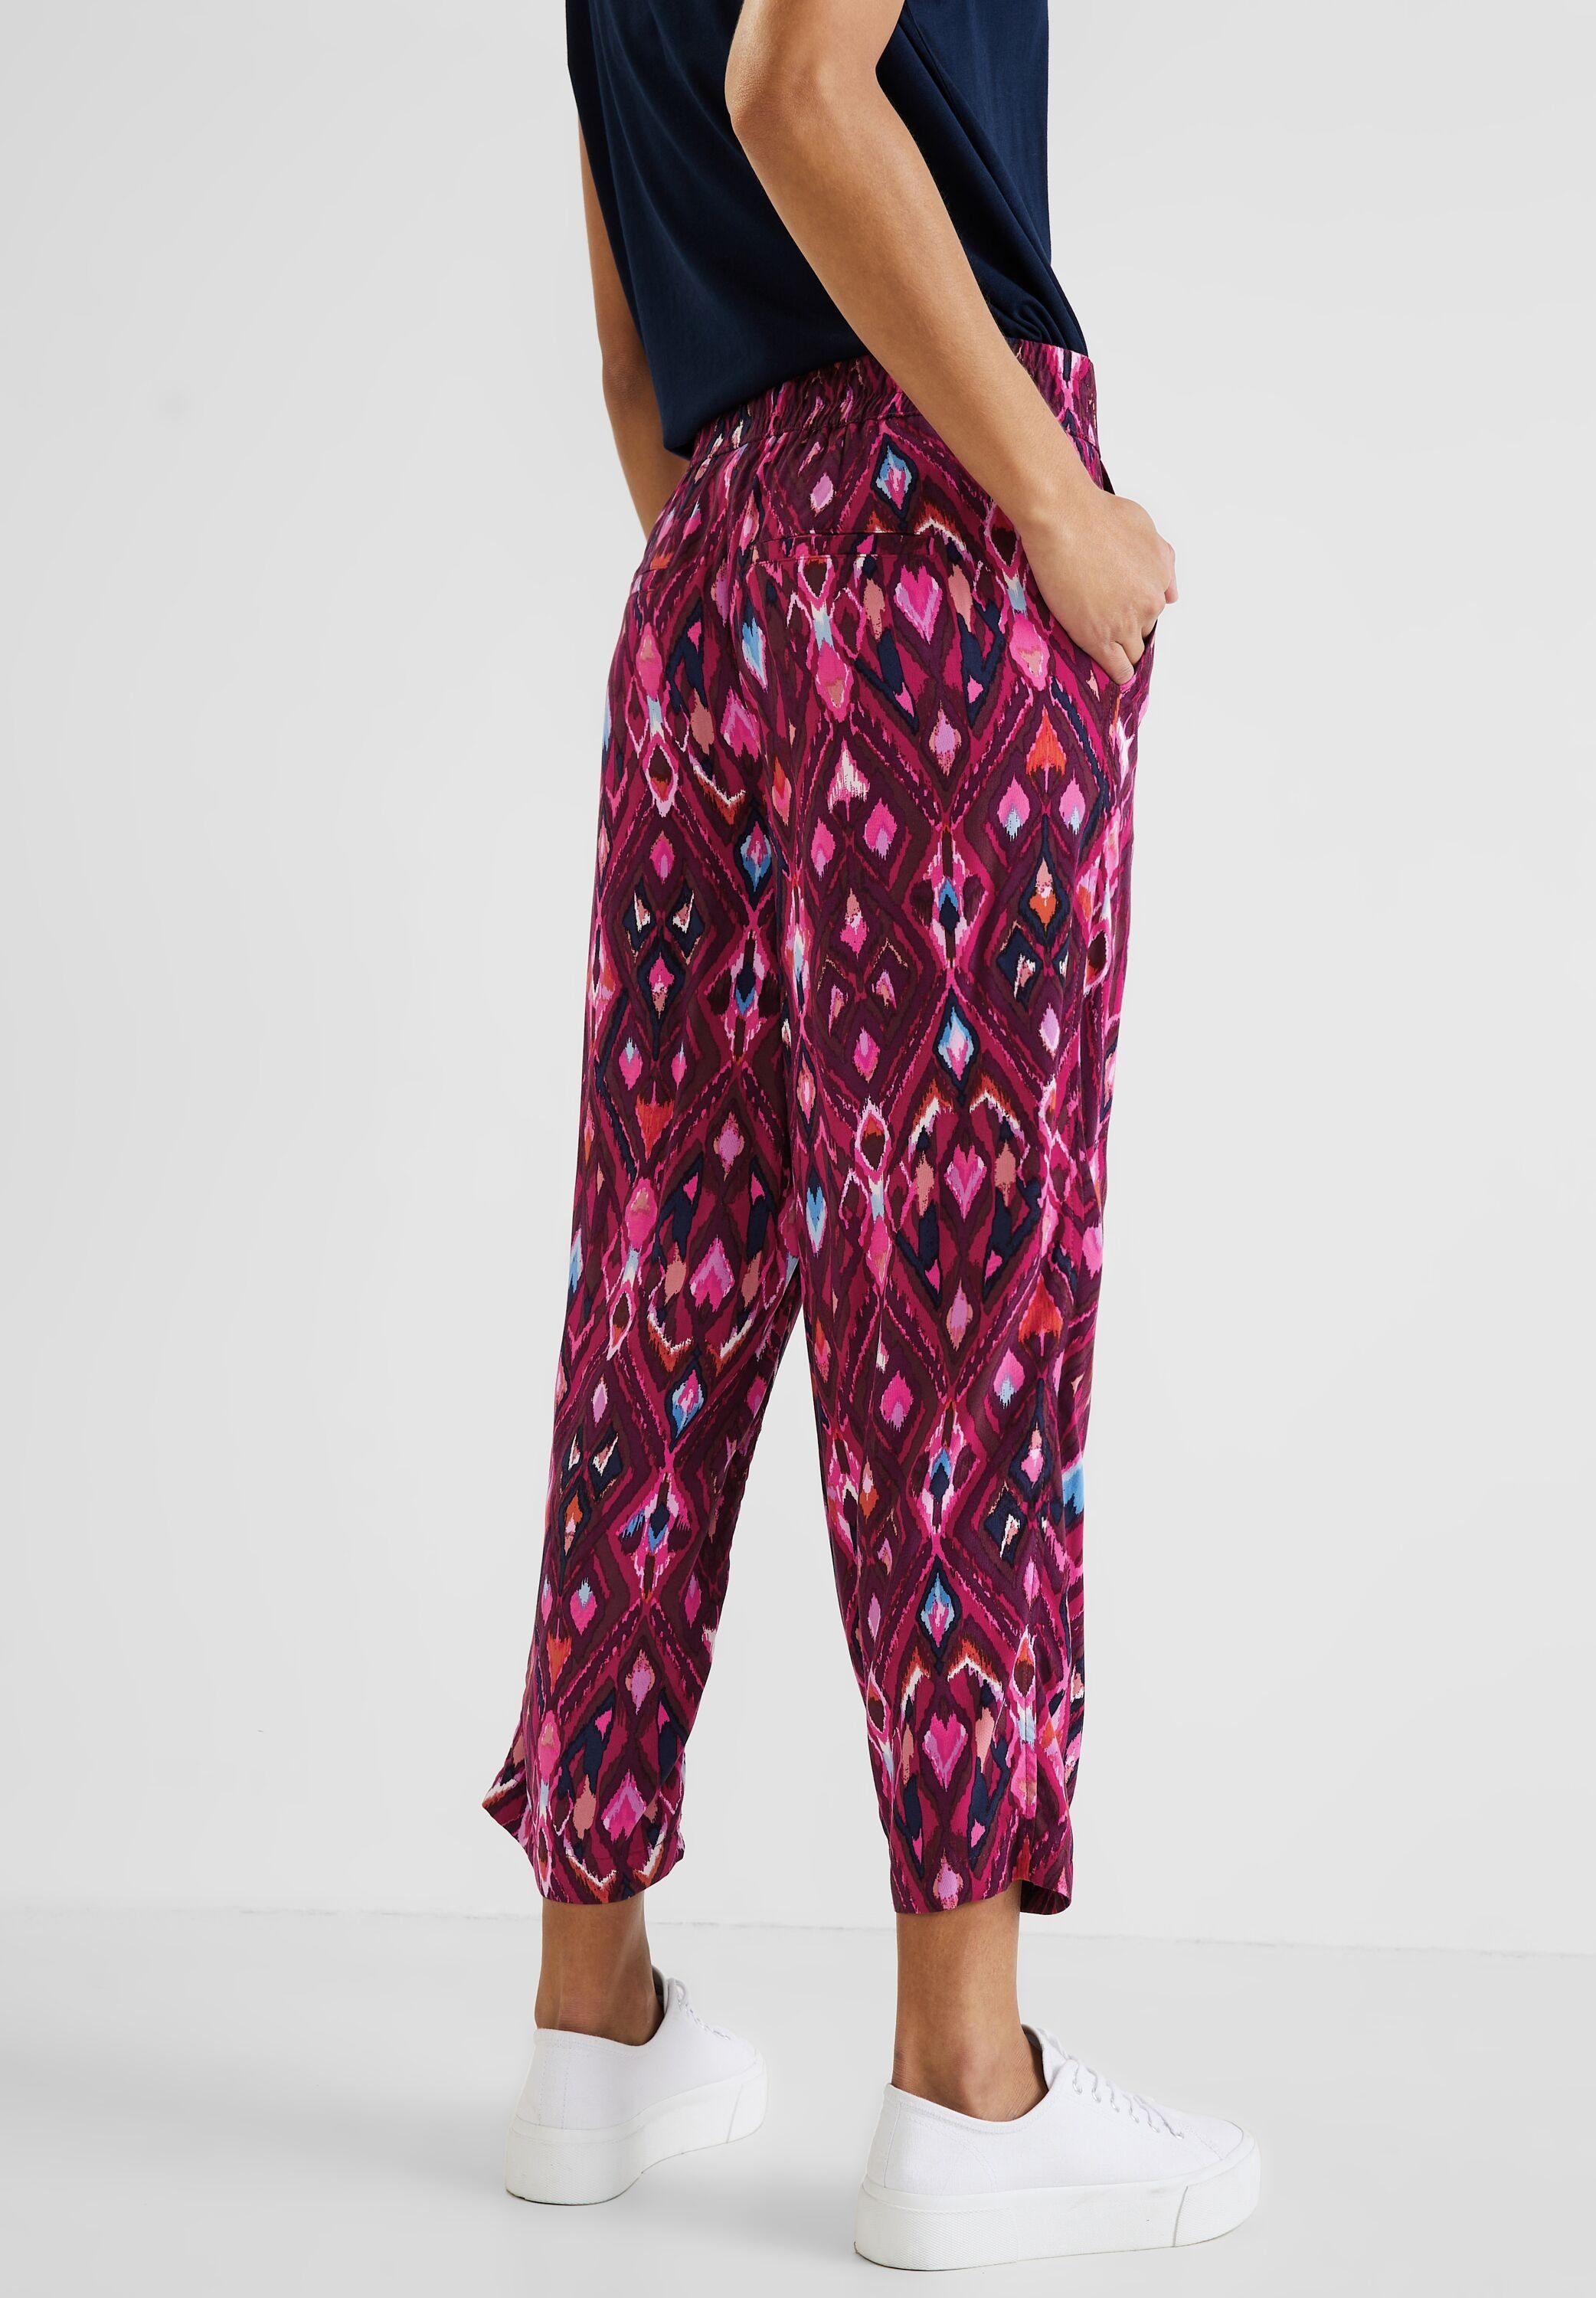 Ikatprint STREET Fit tamed mit Loose ONE Stoffhose Hose berry